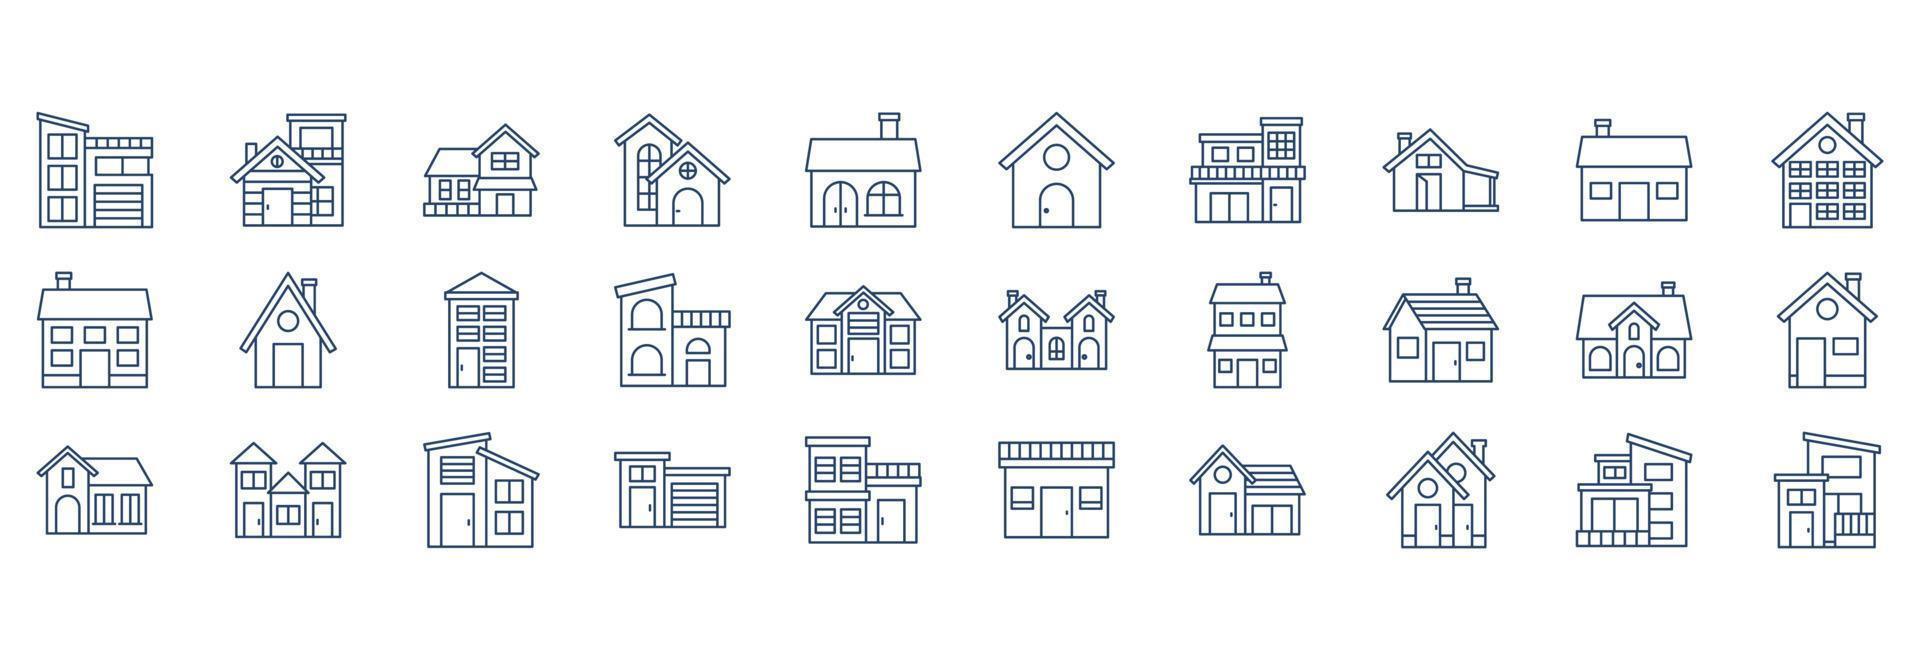 Collection of icons related to Home and Houses, including icons like building, real estate, Architecture and more. vector illustrations, Pixel Perfect set